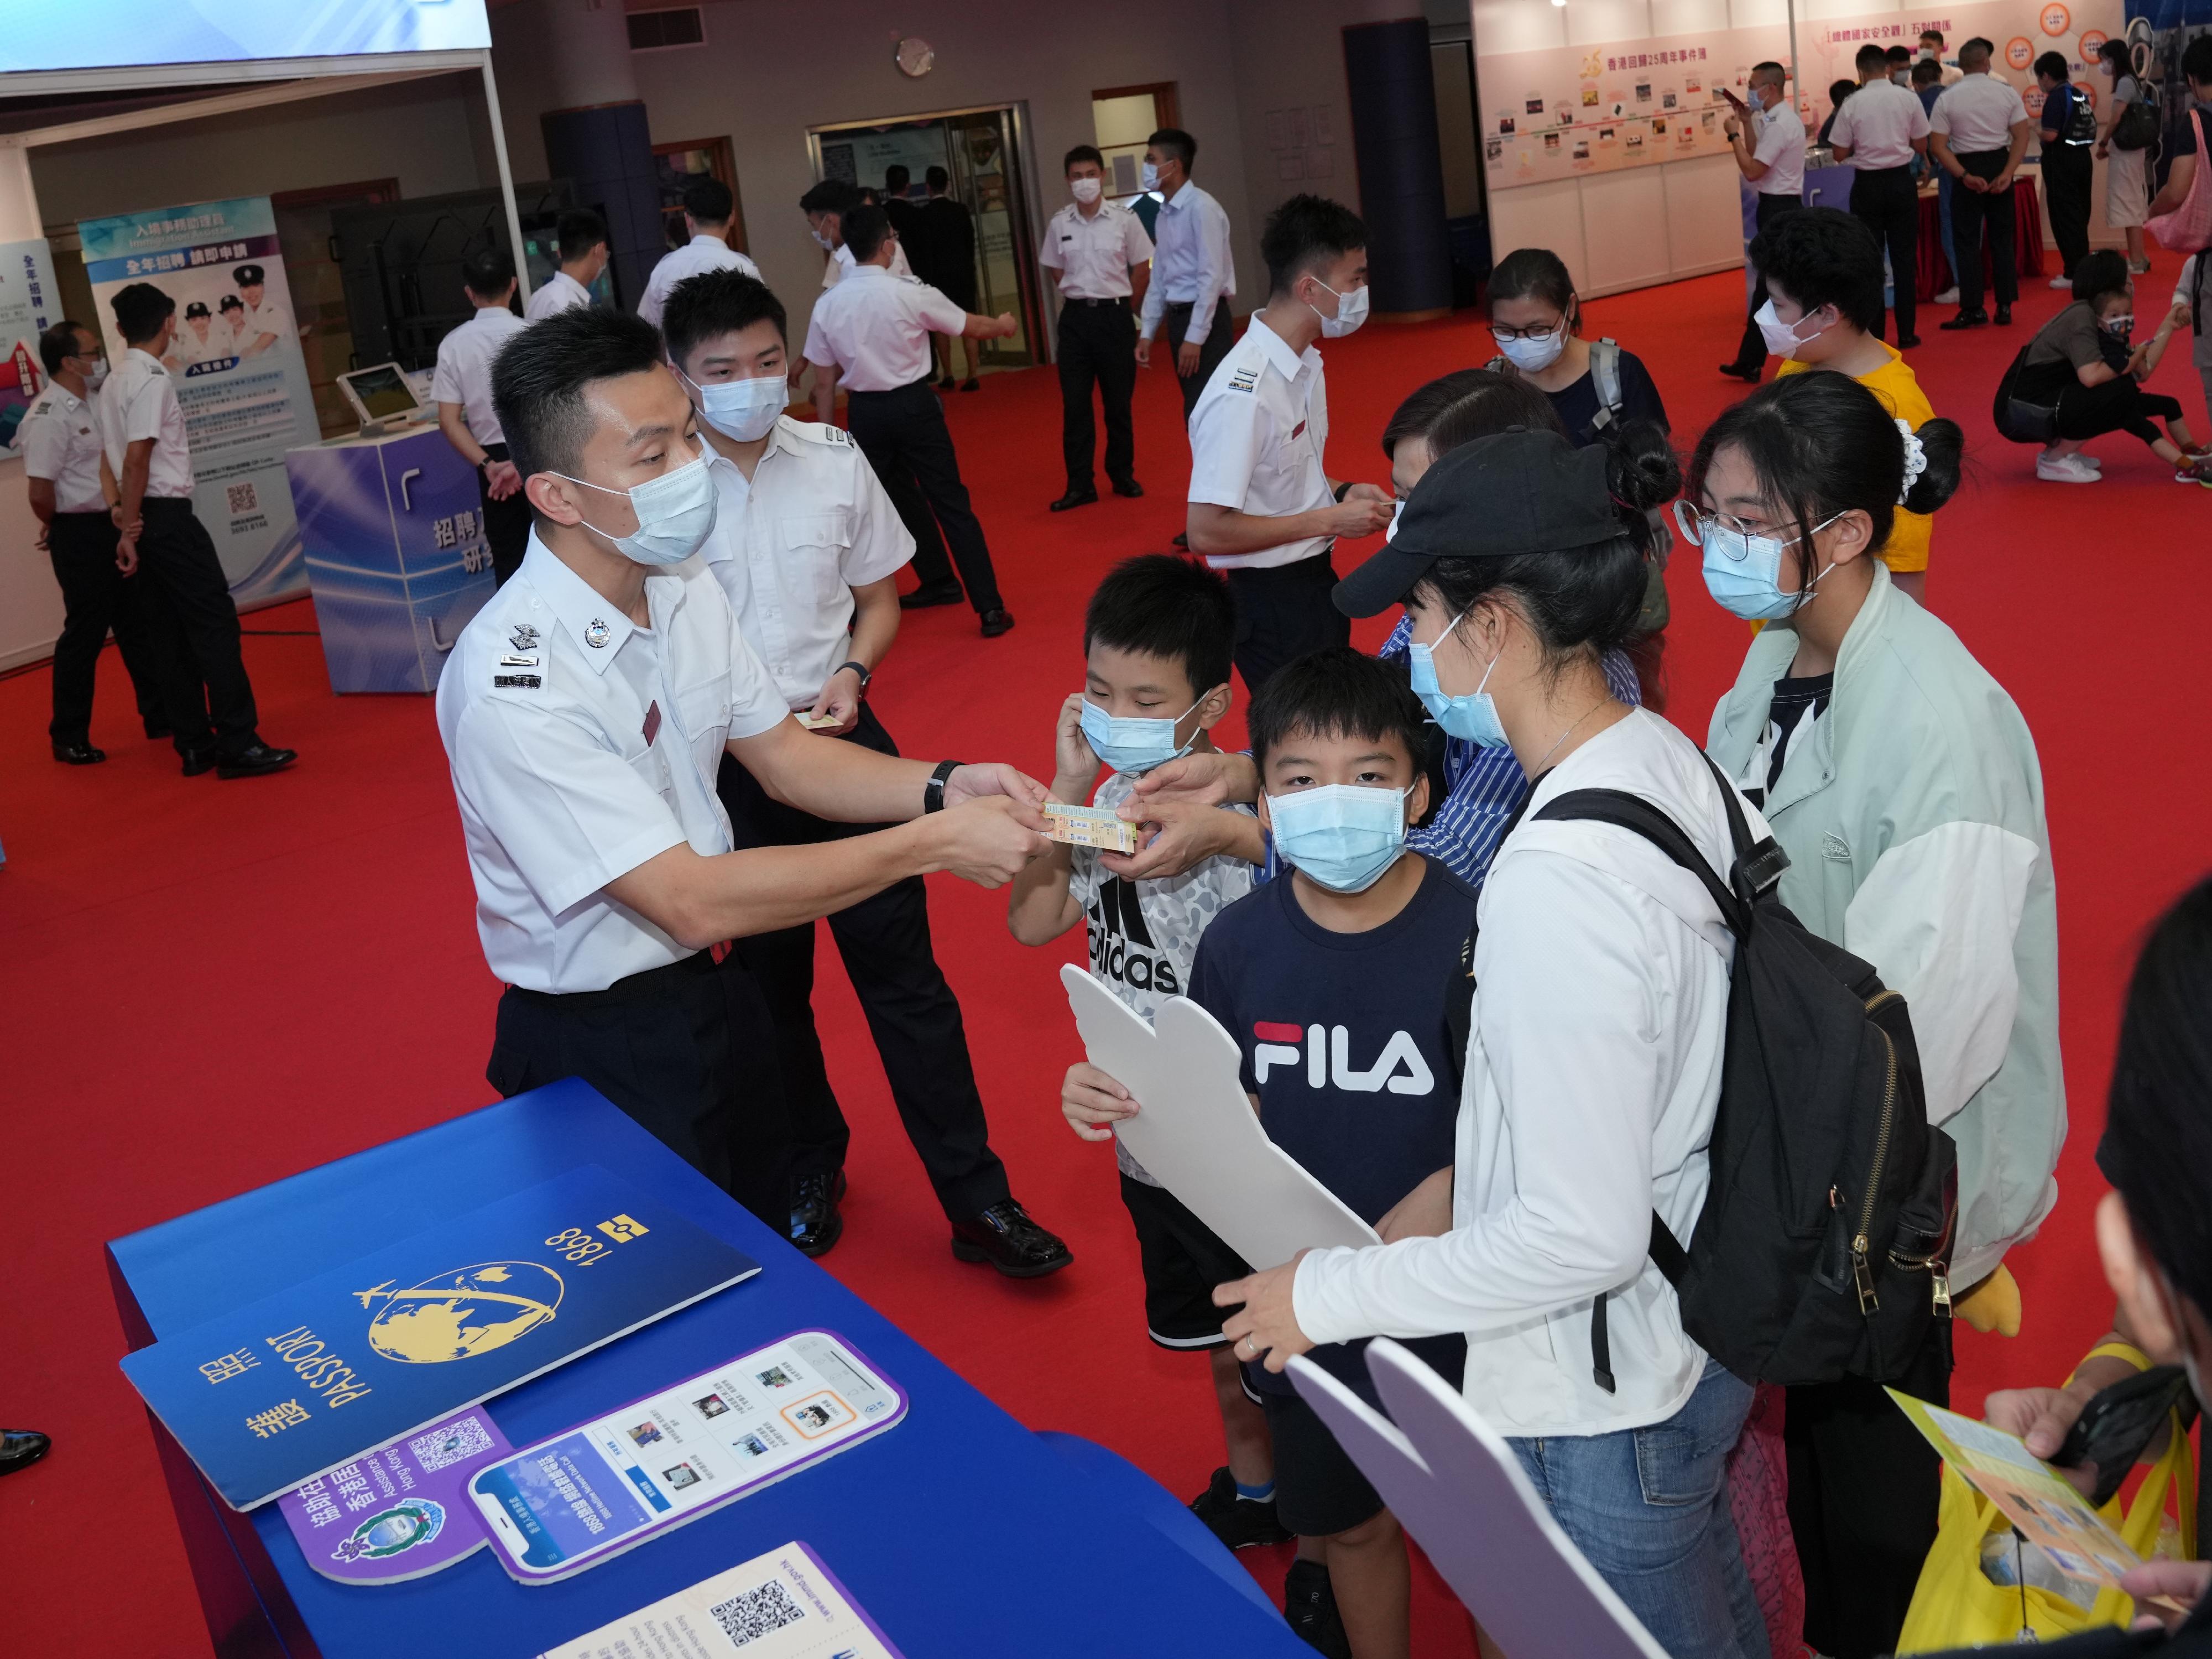 The Immigration Service Institute of Training and Development held an Open Day today (October 29). Photo shows members of the public touring the exhibition booths during the Open Day.